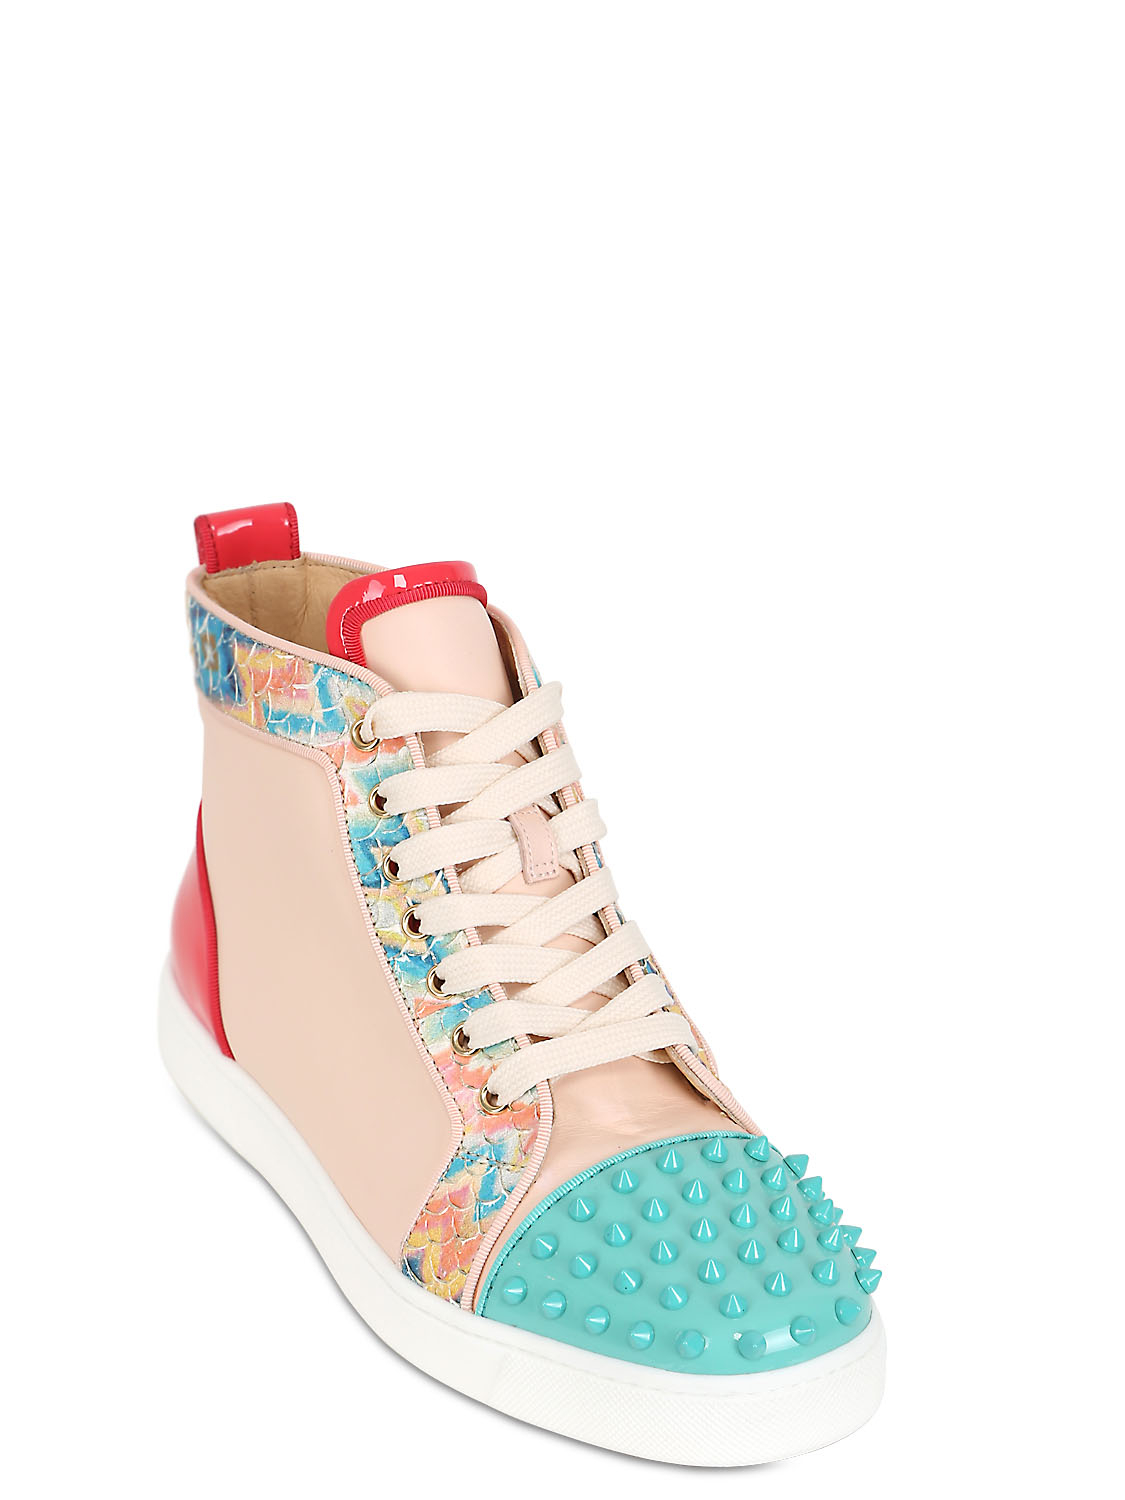 Christian louboutin Spiked Patent Leather High Top Sneakers in ...